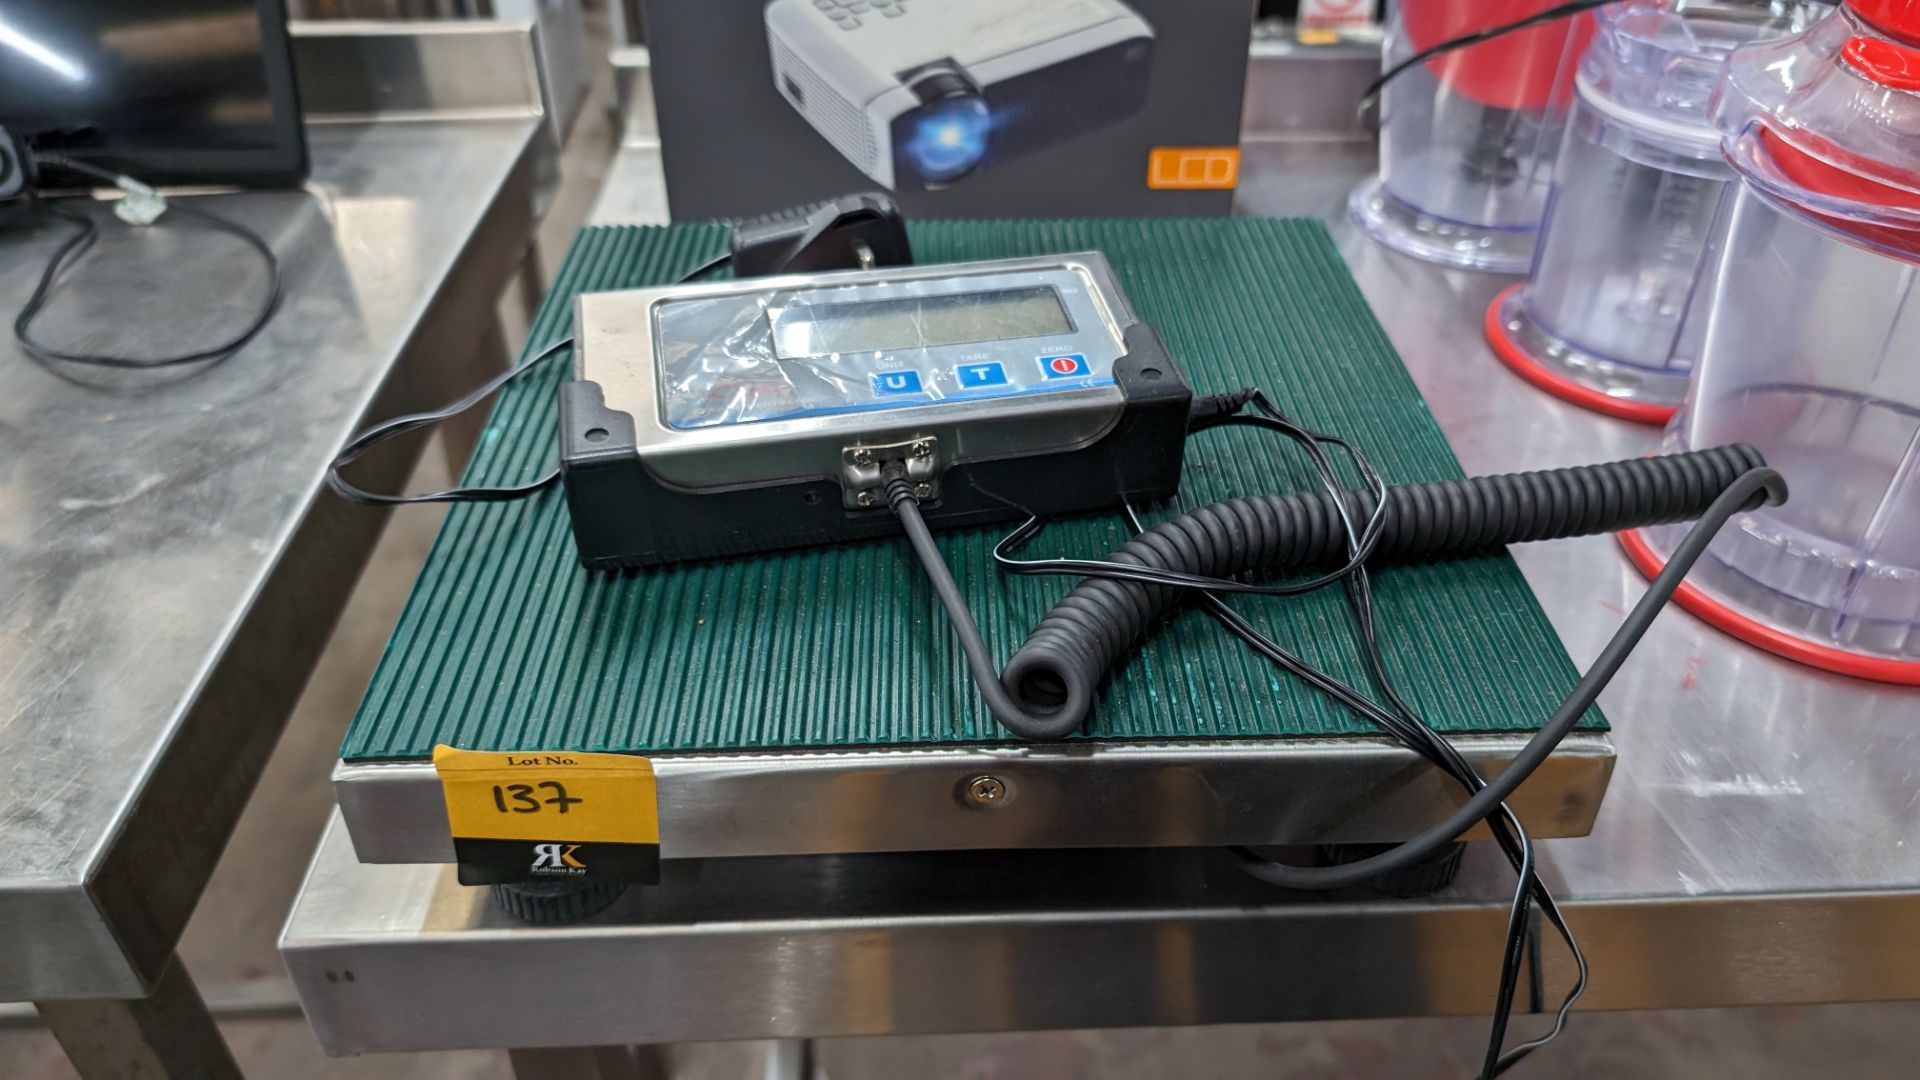 CSG small platform scales with wired digital display